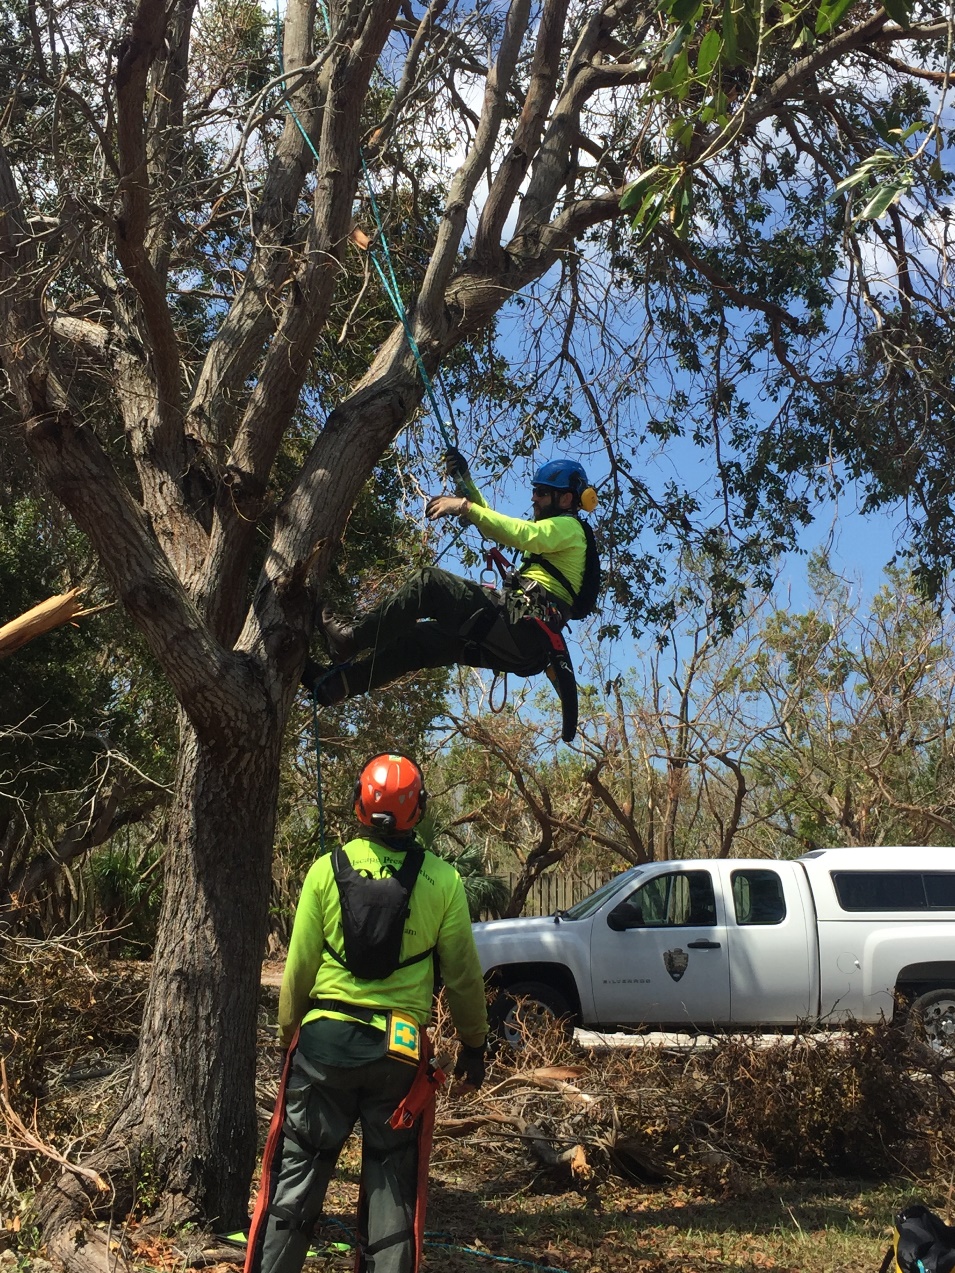 Two NPS crewmembers working on a tree